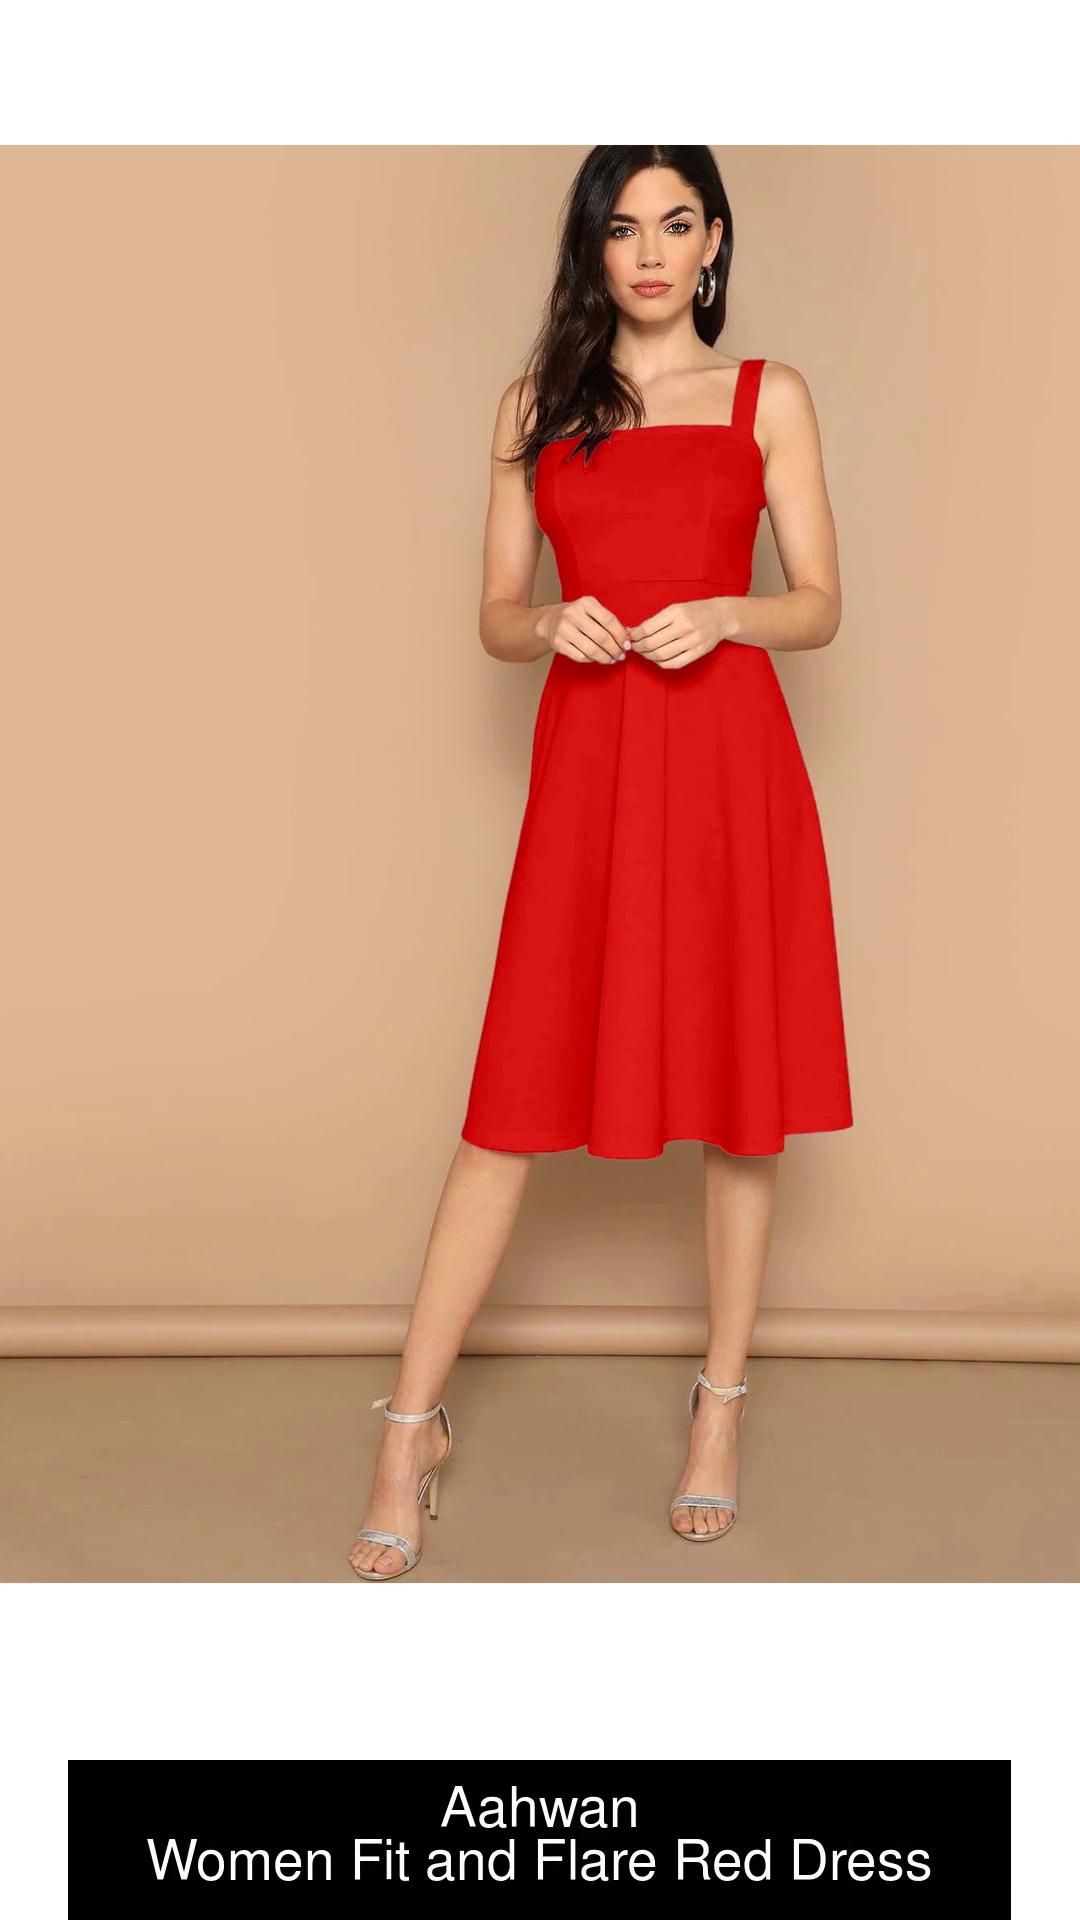 Aahwan Women Fit and Flare Red Dress